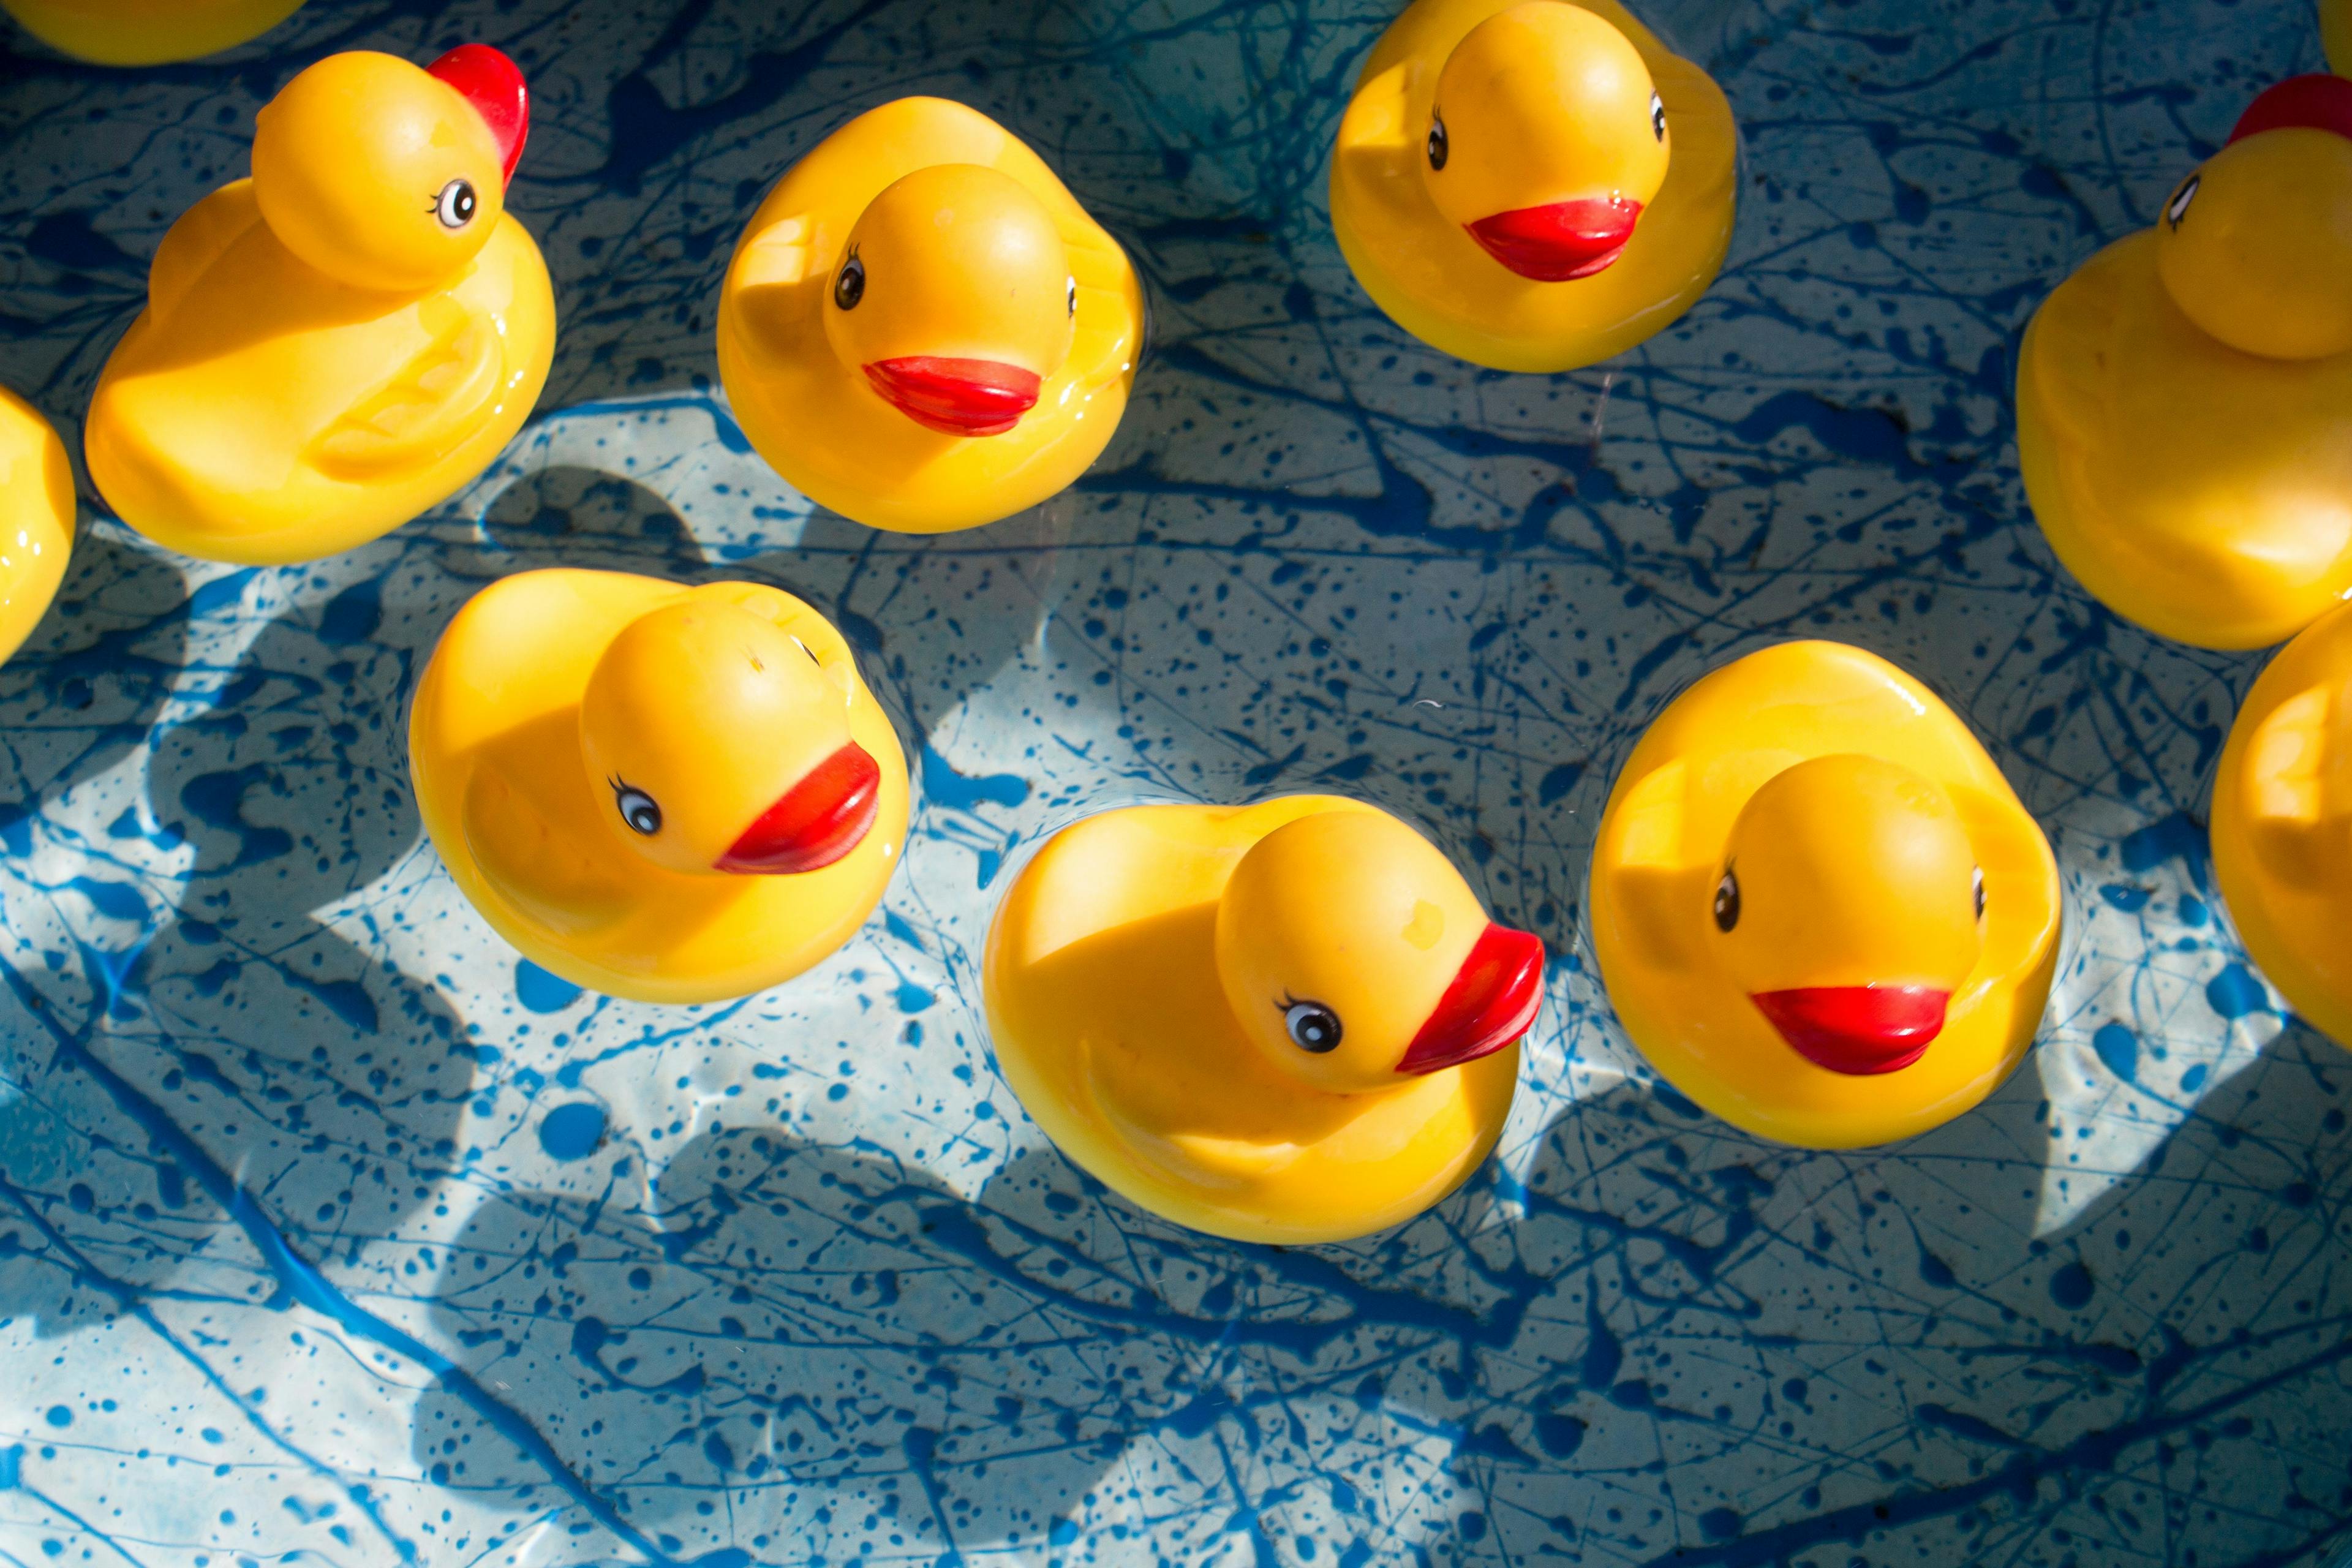 Luxembourg events programme for April 28-30: duck race, 